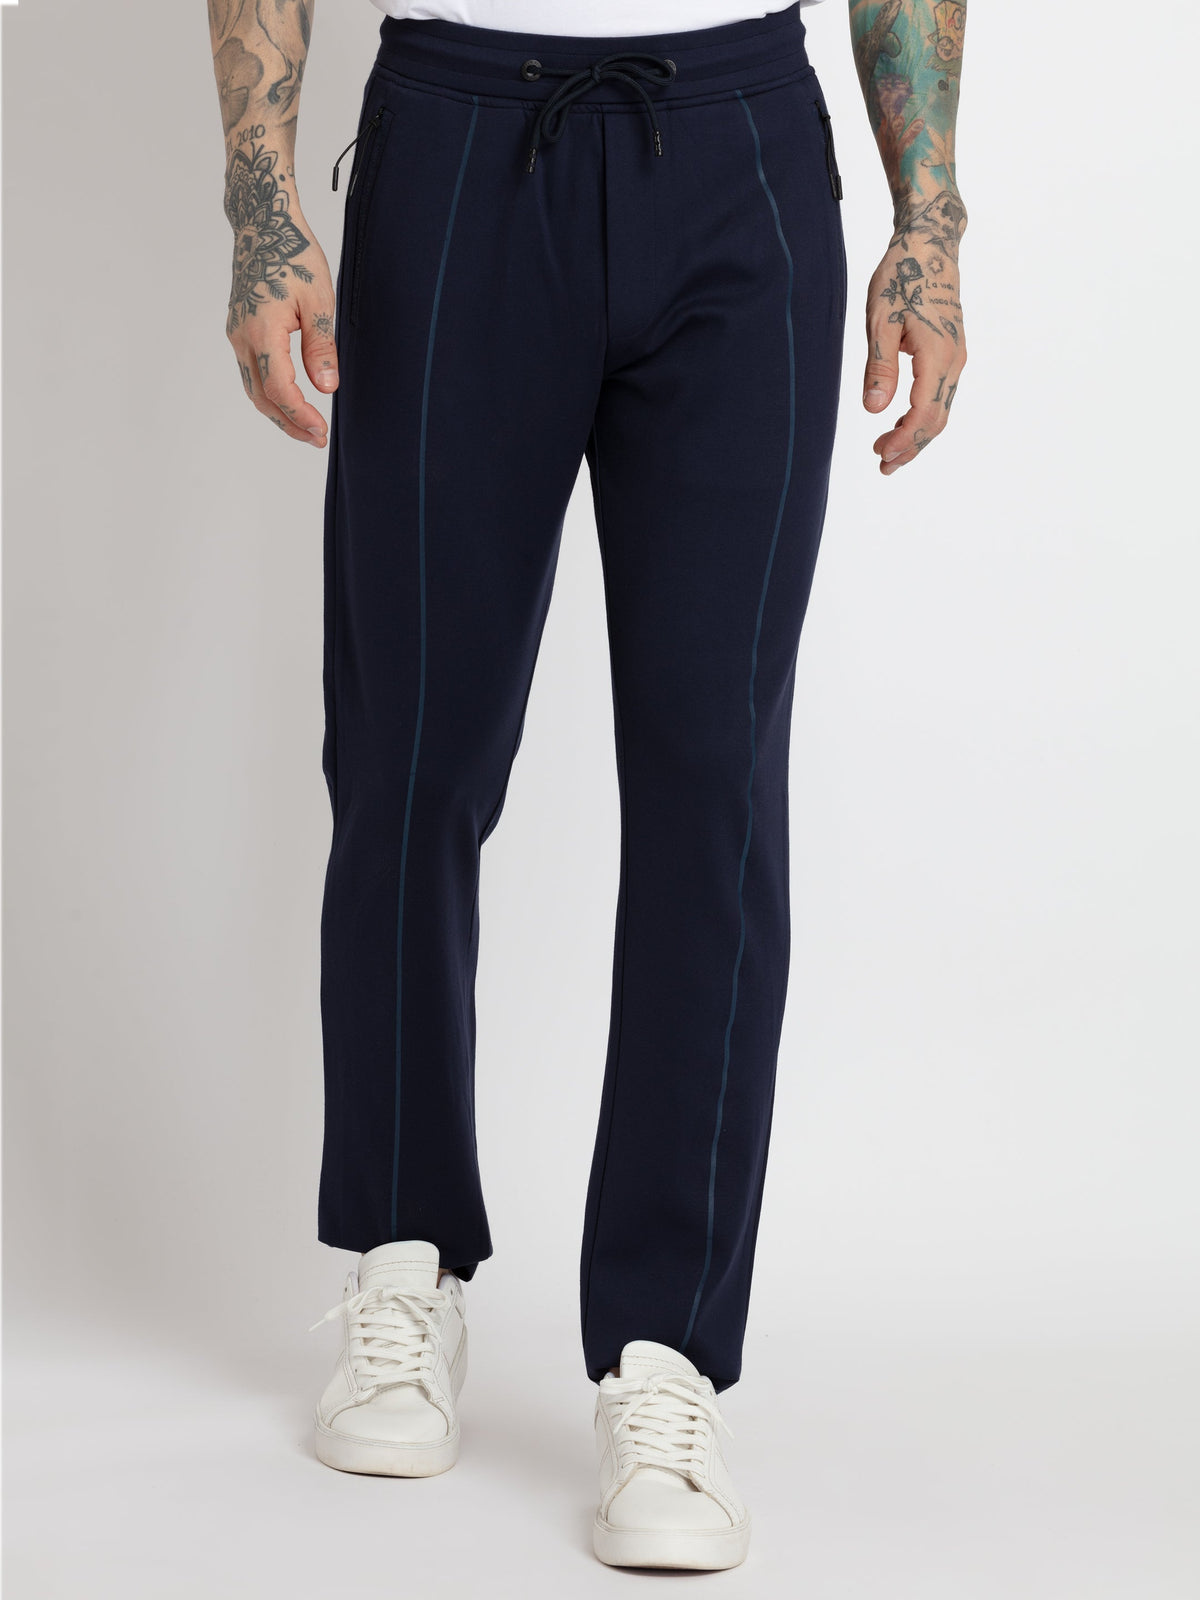 Sports Uniforms Such As Track Pants at Rs 200/piece | Track Pant in Chennai  | ID: 18990814212